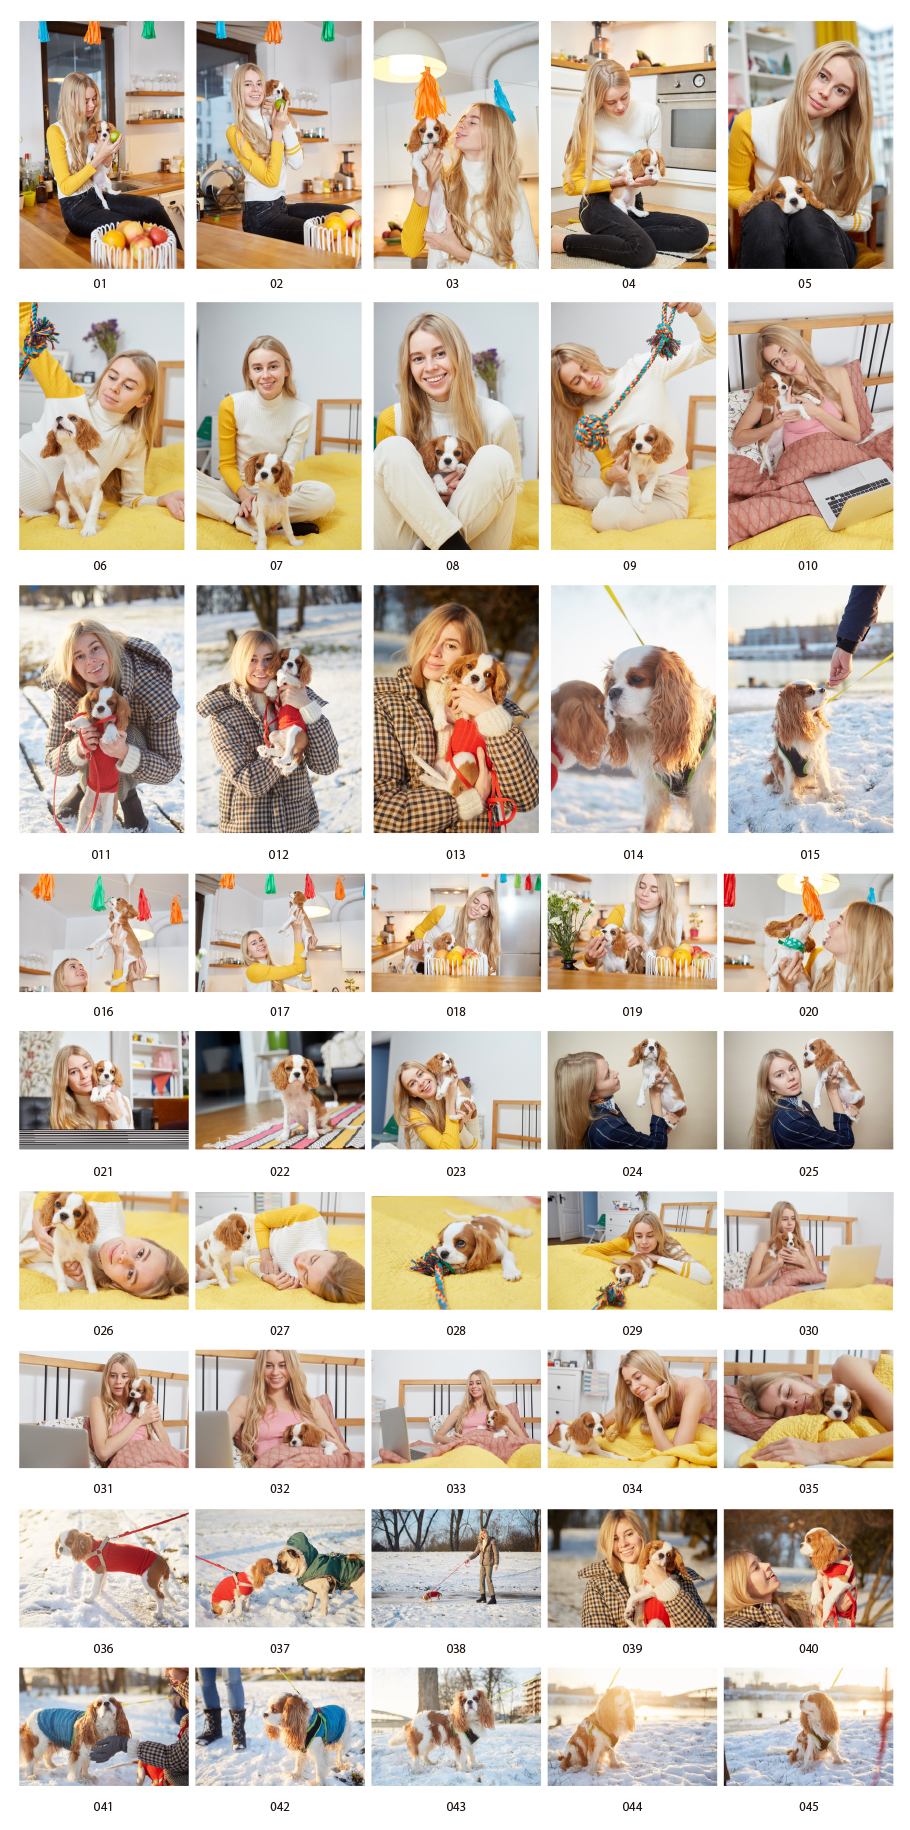 Photo material of women living with dogs